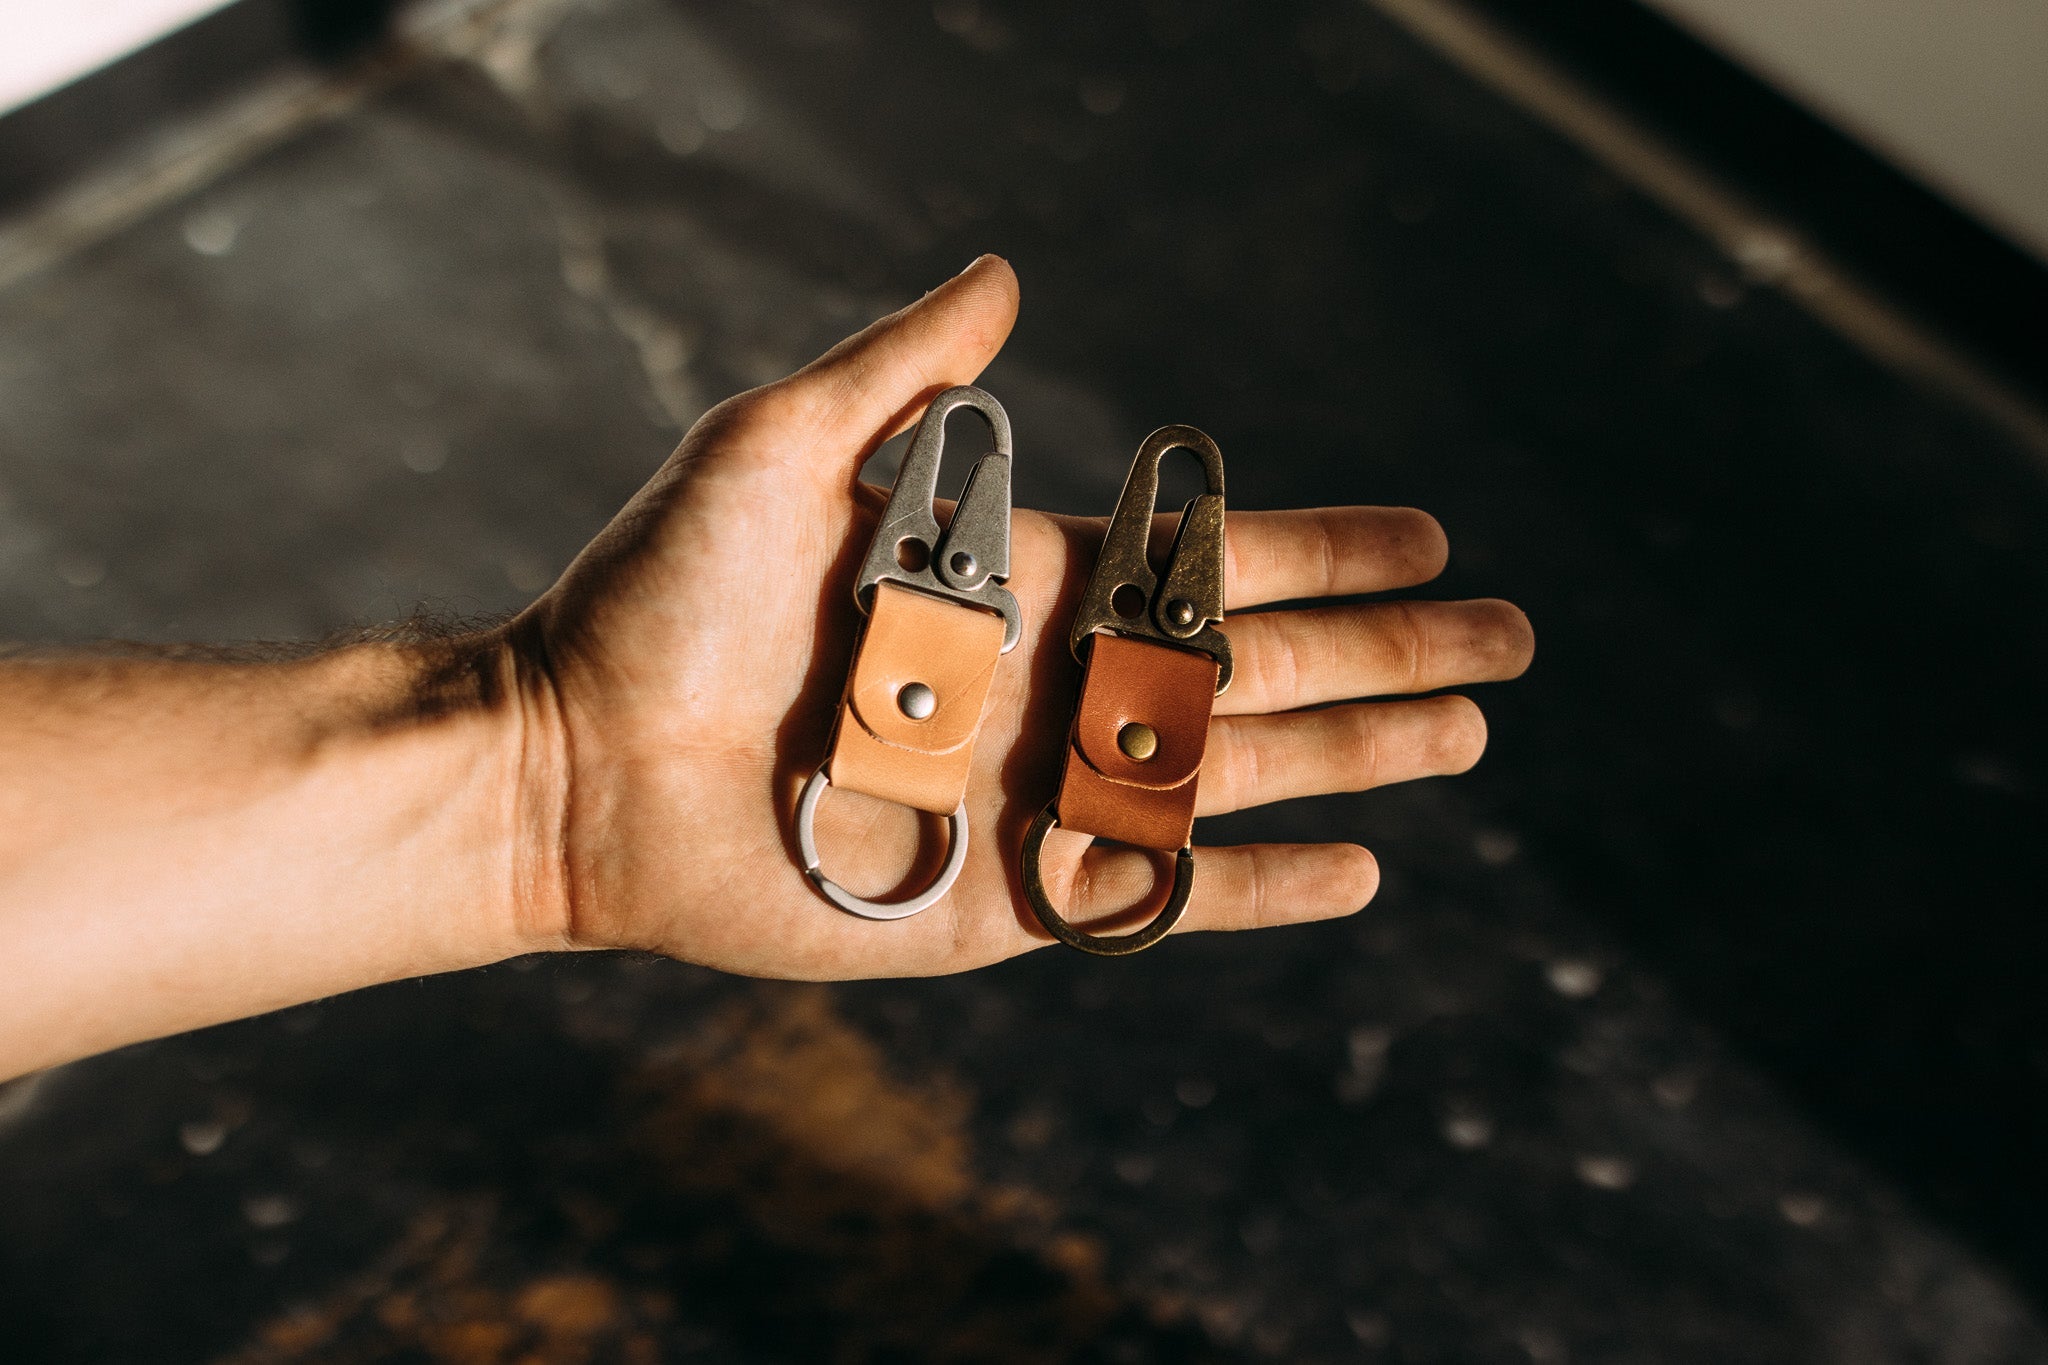 Handmade Leather Key Holders, Leather Wallet Key Ring